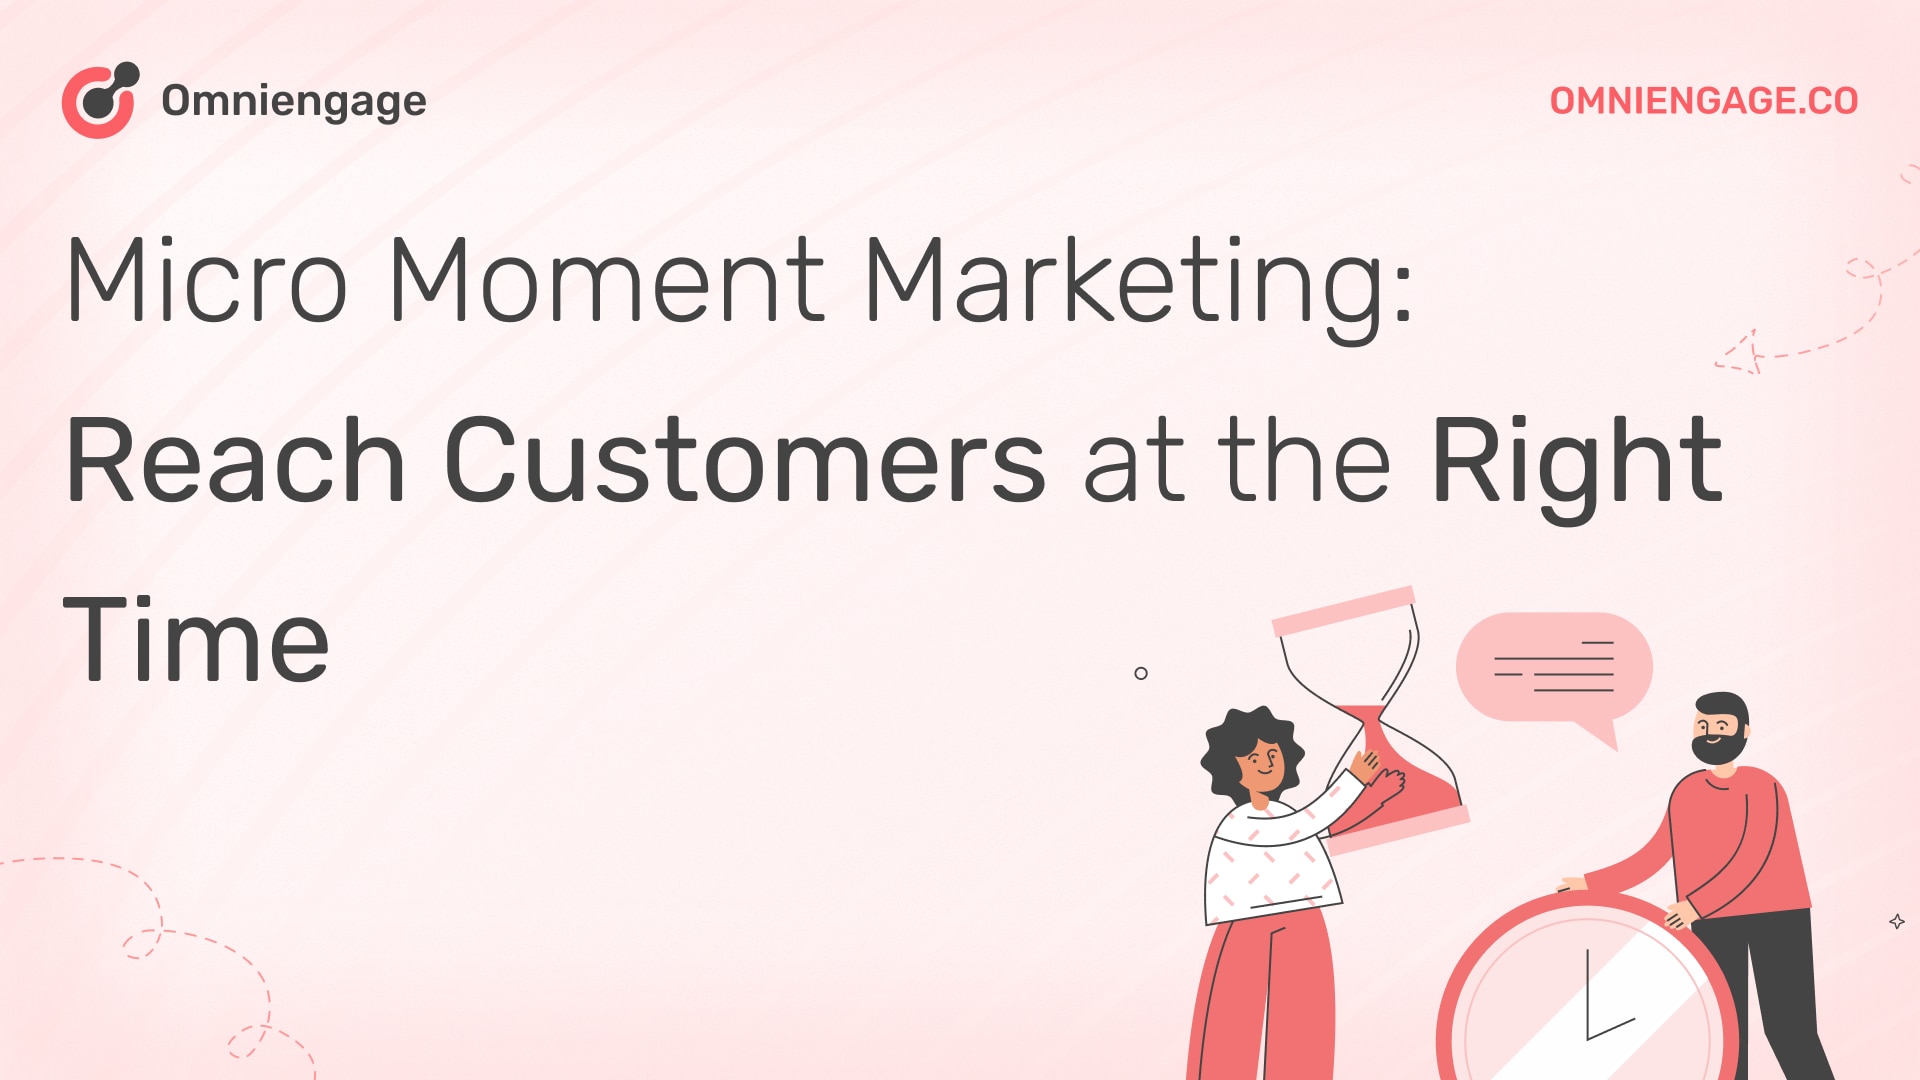 Micro Moment Marketing: Reach Customers at the Right Time